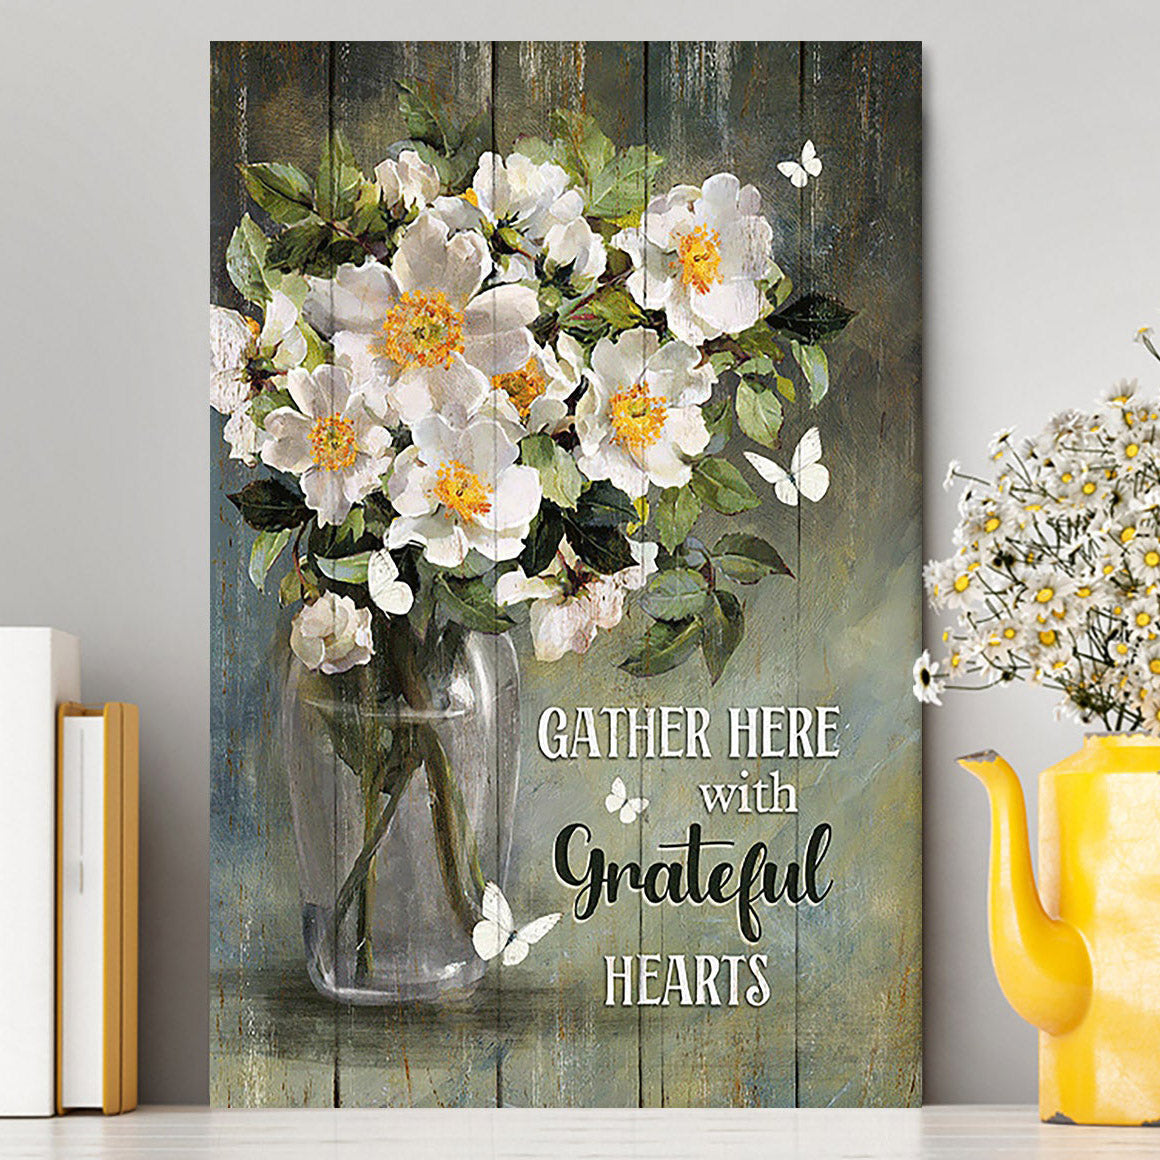 Magnolias Flower Gather Here With Grateful Hearts Canvas - Christian Wall Art - Religious Home Decor